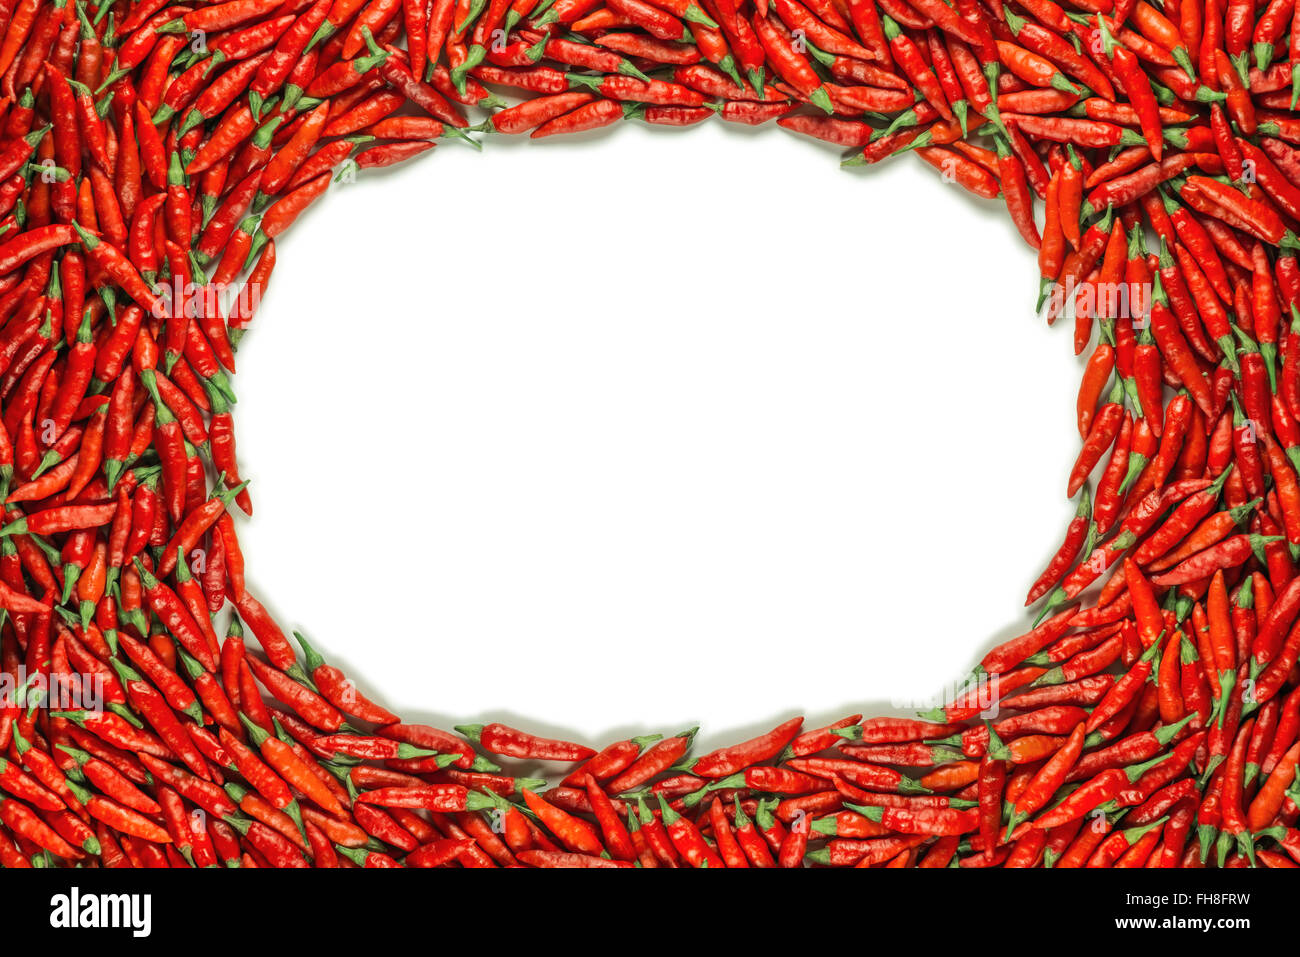 Red peppers with blank space in the center. Your text in the center. Stock Photo